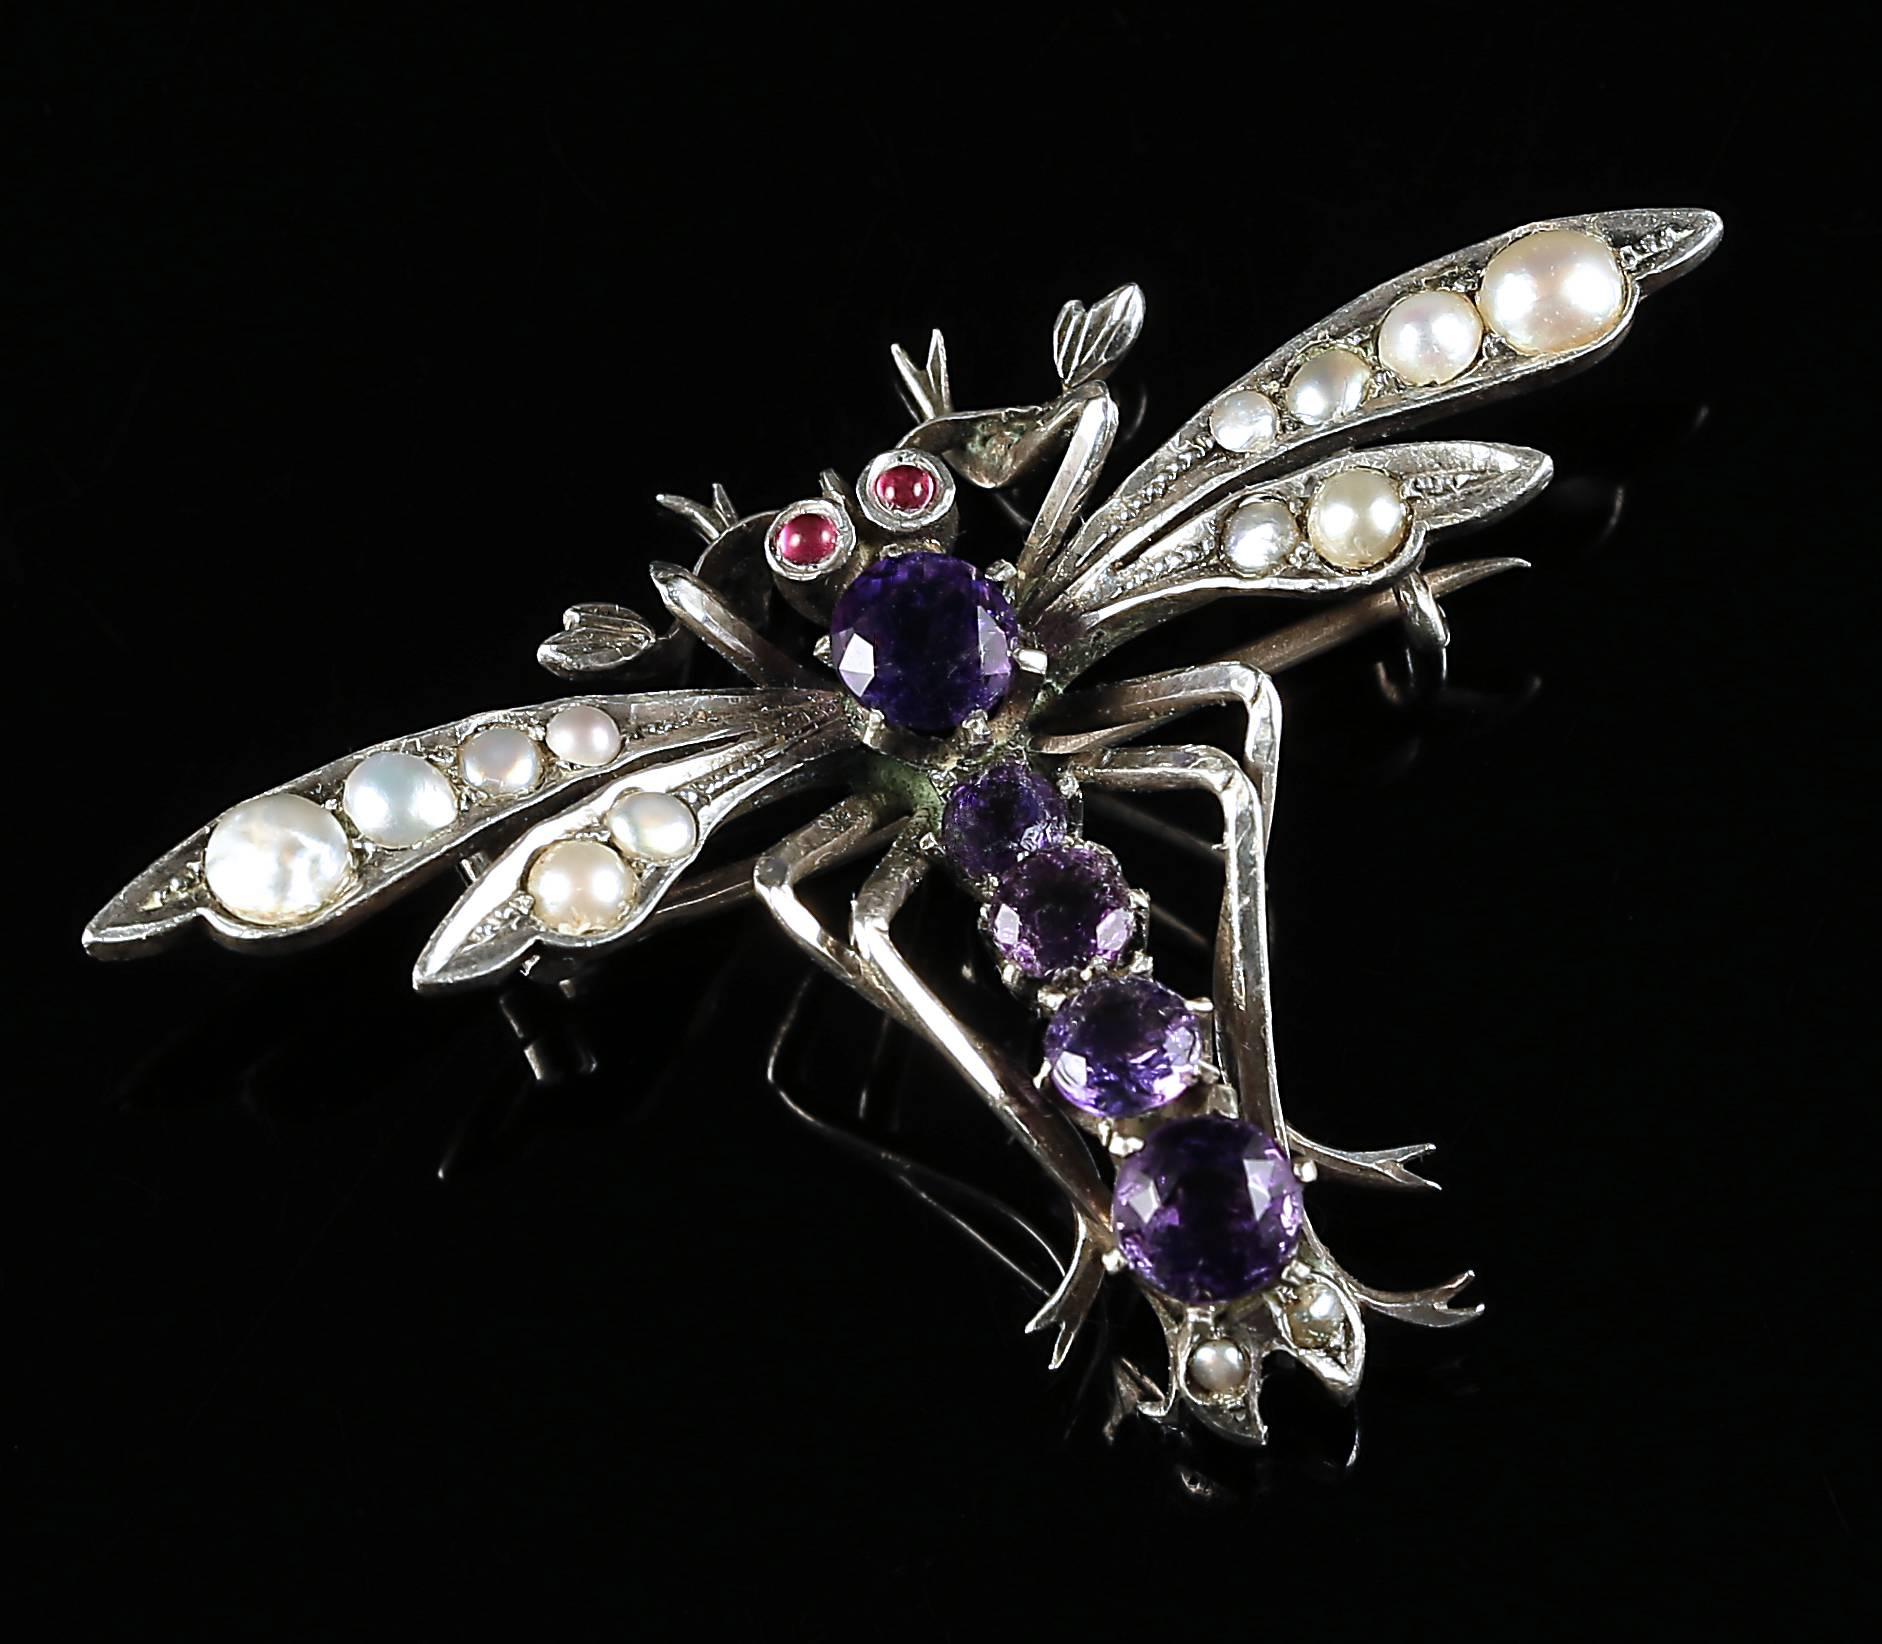 This genuine Victorian Antique Sterling Silver Dragon Fly brooch is set with beautiful pearls, rubies for his eyes and amethyst stones for his body.

The purple amethyst has been highly esteemed throughout the ages for its stunning beauty and